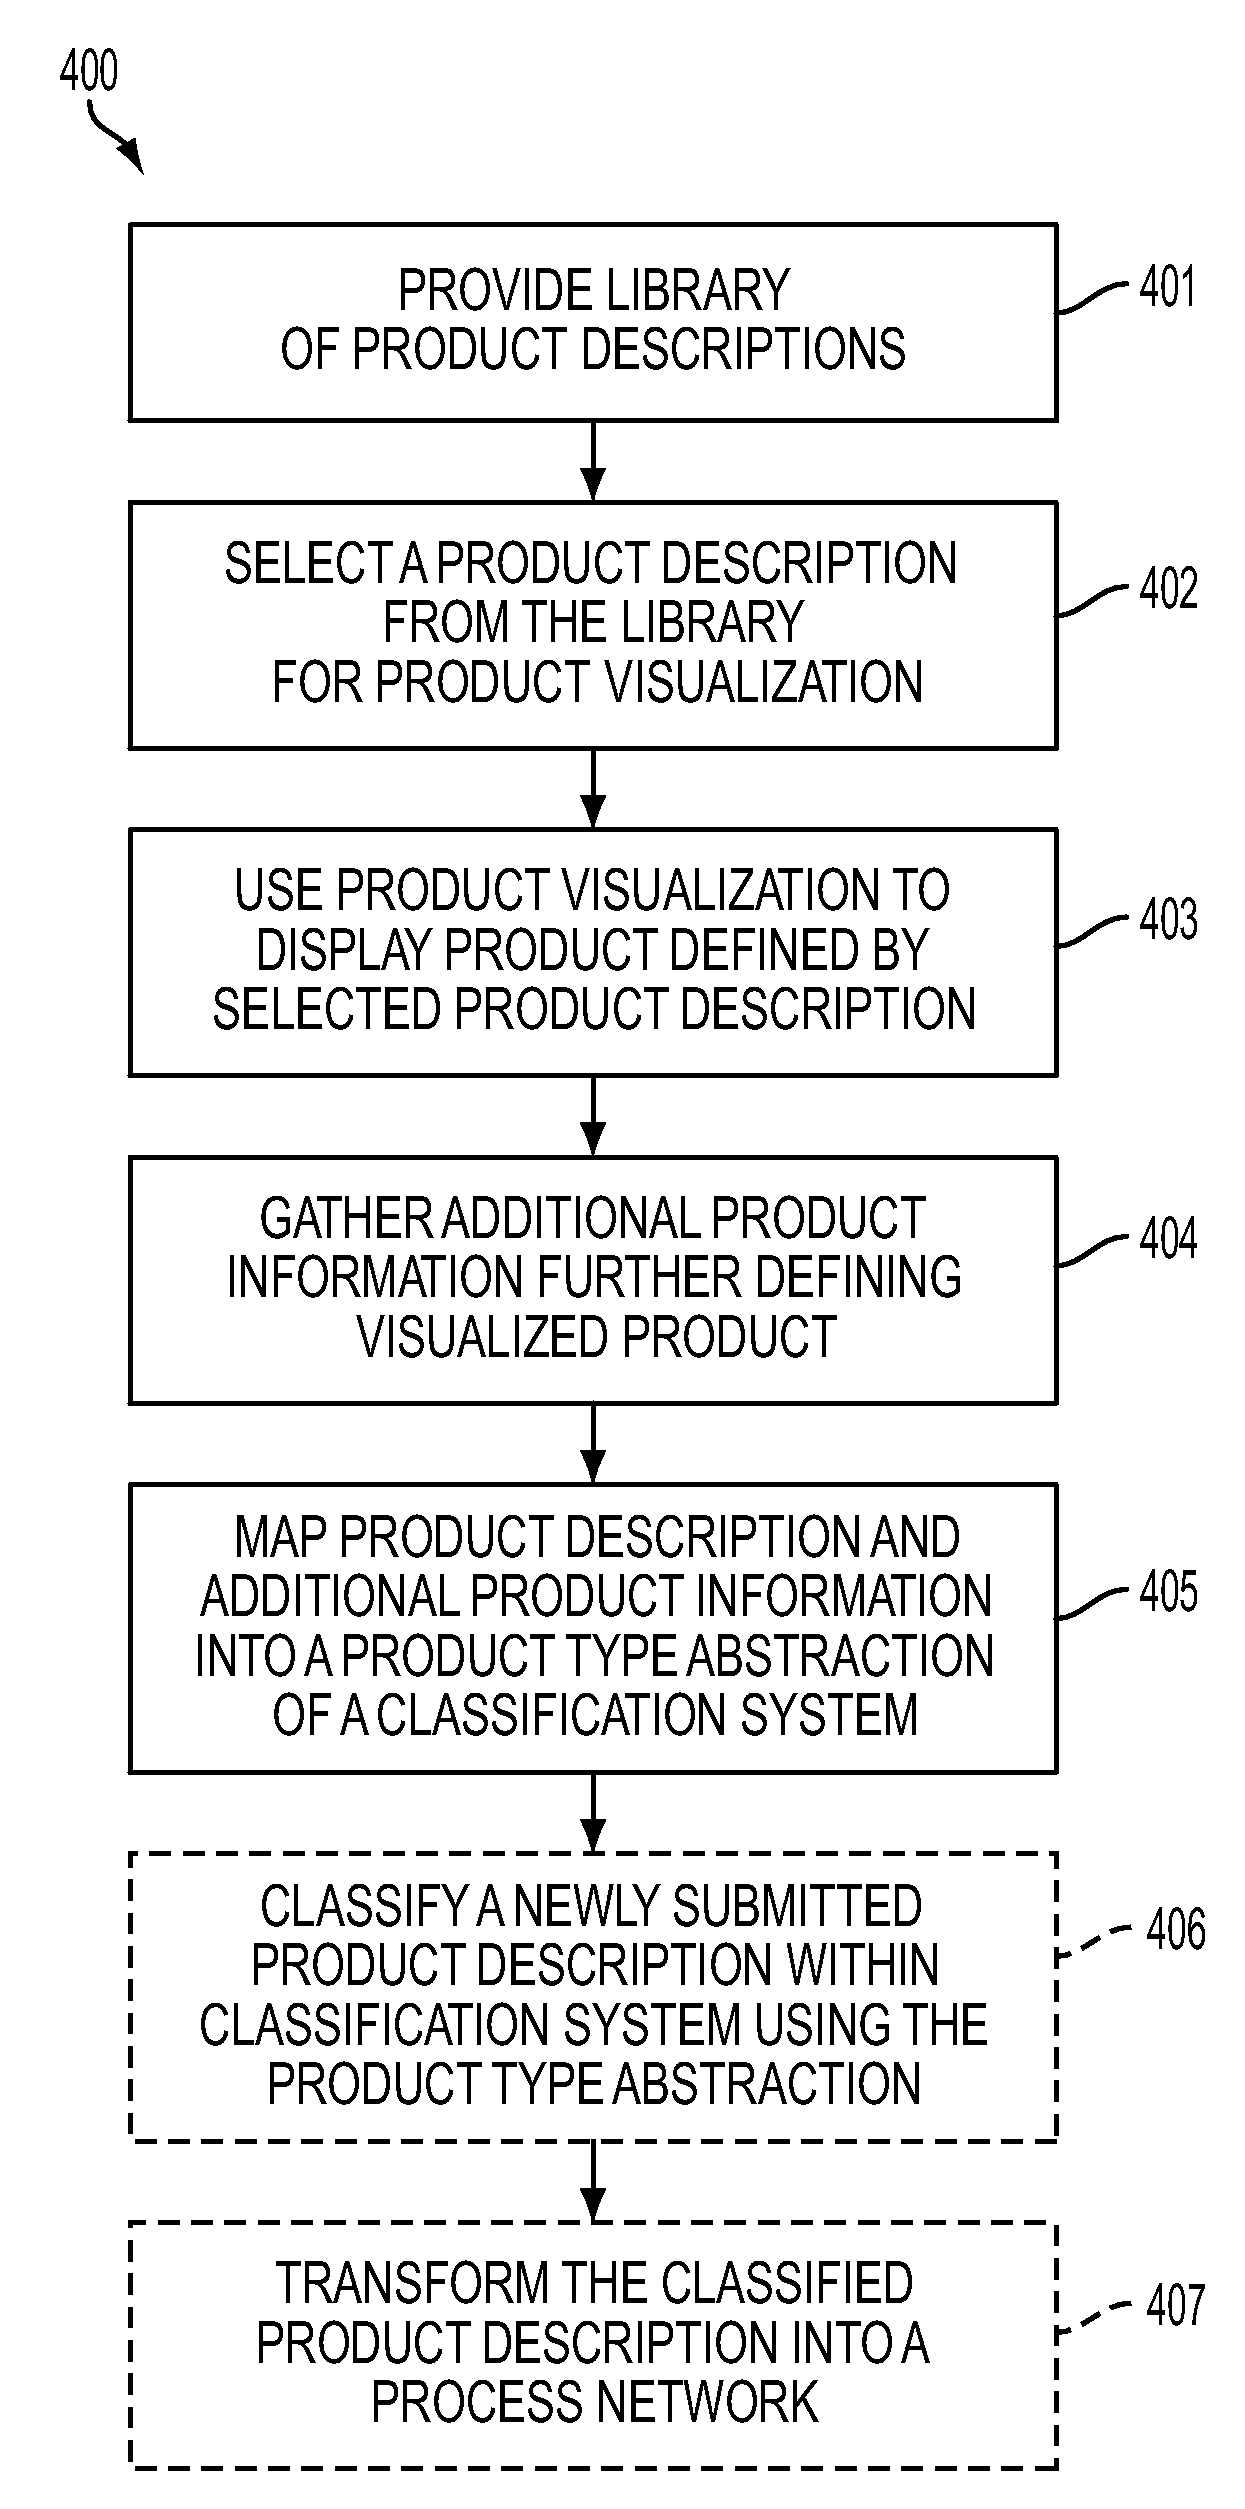 Knowledge gathering methods and systems for transforming product descriptions into process networks